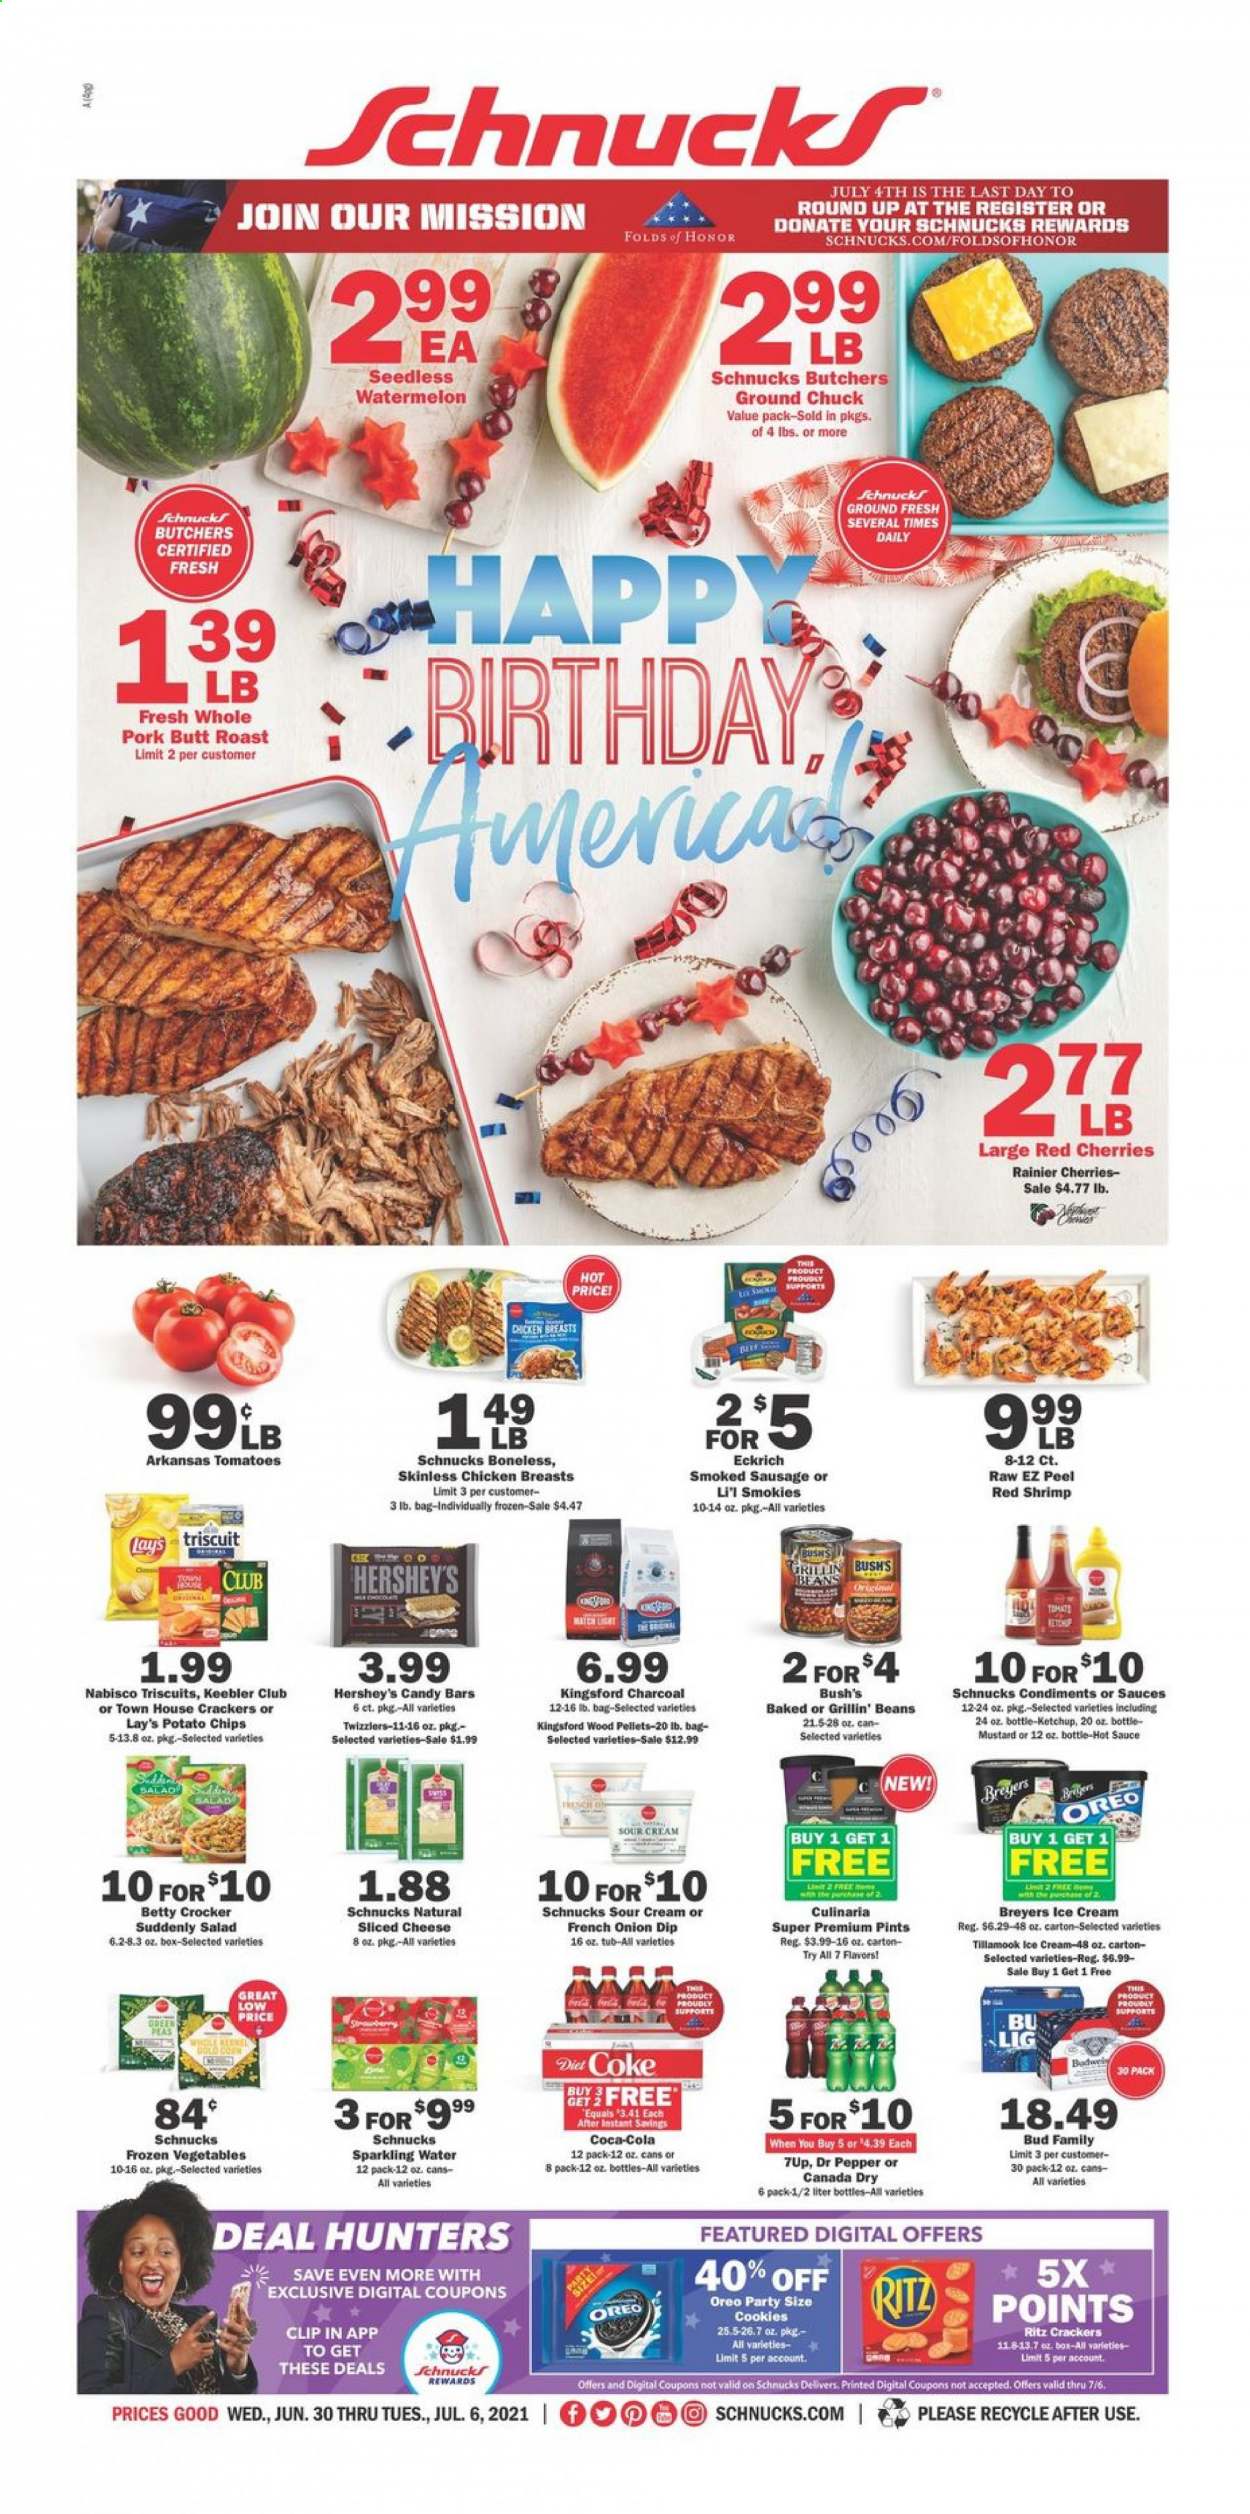 thumbnail - Schnucks Flyer - 06/30/2021 - 07/06/2021 - Sales products - beans, corn, tomatoes, peas, salad, watermelon, cherries, shrimps, sausage, smoked sausage, sliced cheese, cheese, Oreo, sour cream, dip, ice cream, Hershey's, frozen vegetables, cookies, crackers, Keebler, RITZ, potato chips, Lay’s, mustard, hot sauce, ketchup, Canada Dry, Coca-Cola, Dr. Pepper, 7UP, sparkling water, chicken breasts, ground chuck. Page 1.